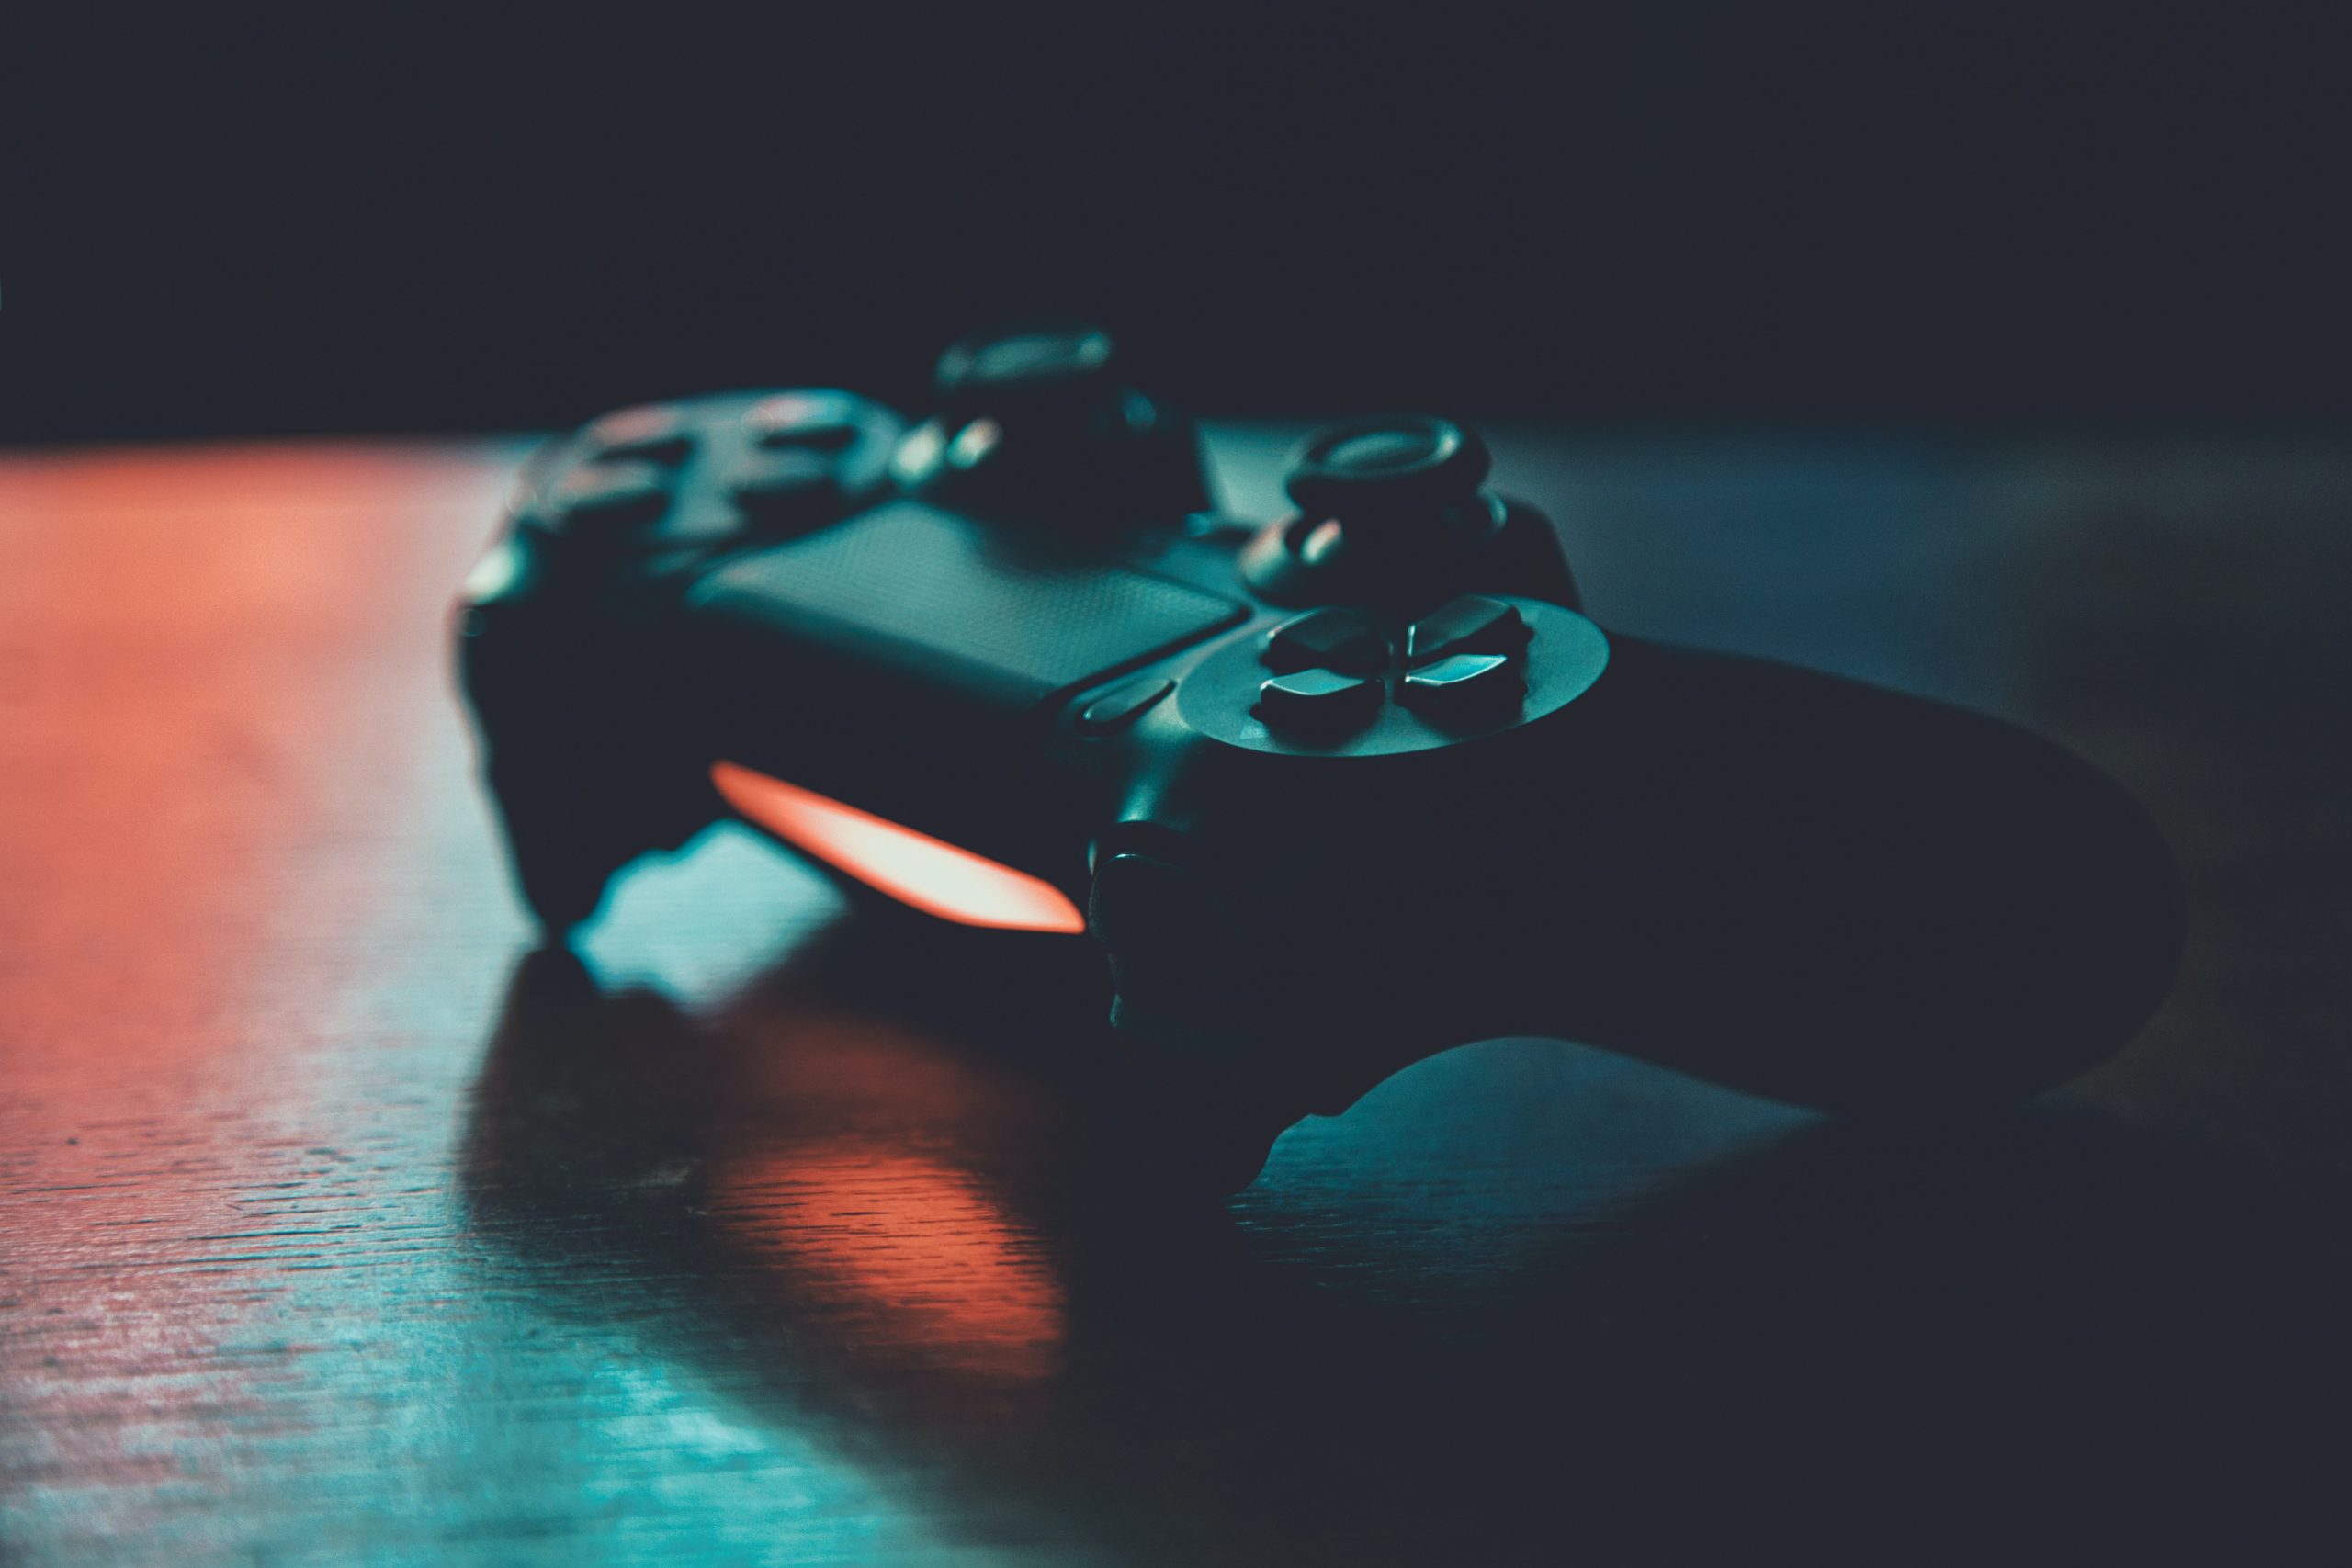 FOSI  The Rise of Online Gaming: Tips to Stay Safe